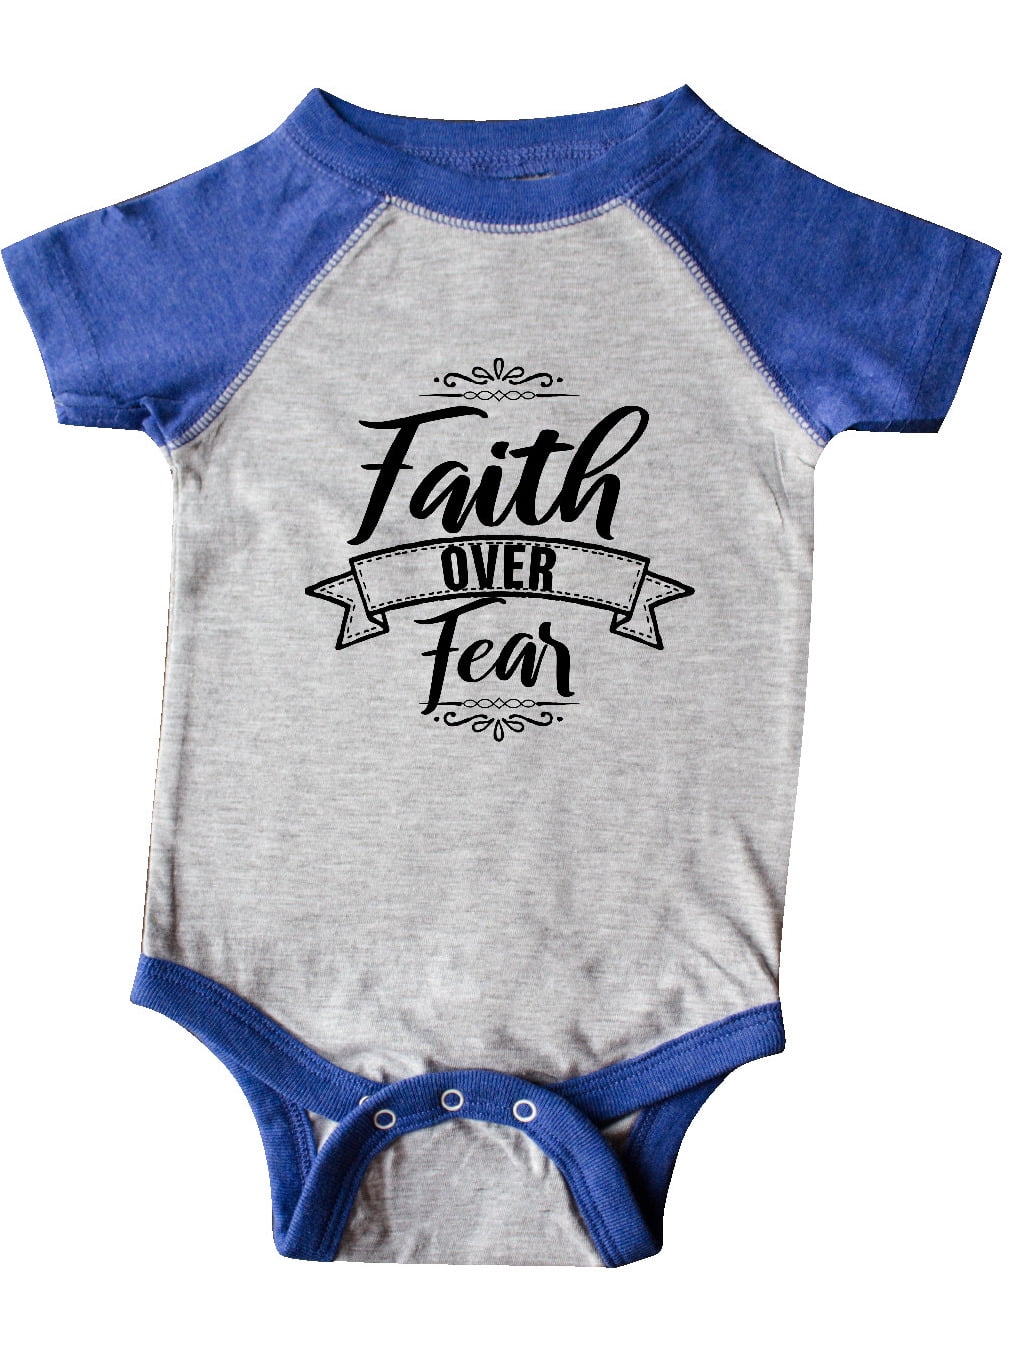 Faith Over Fear Unisex Solid Baby Short Sleeve Romper Jumpsuit 0-24 Months